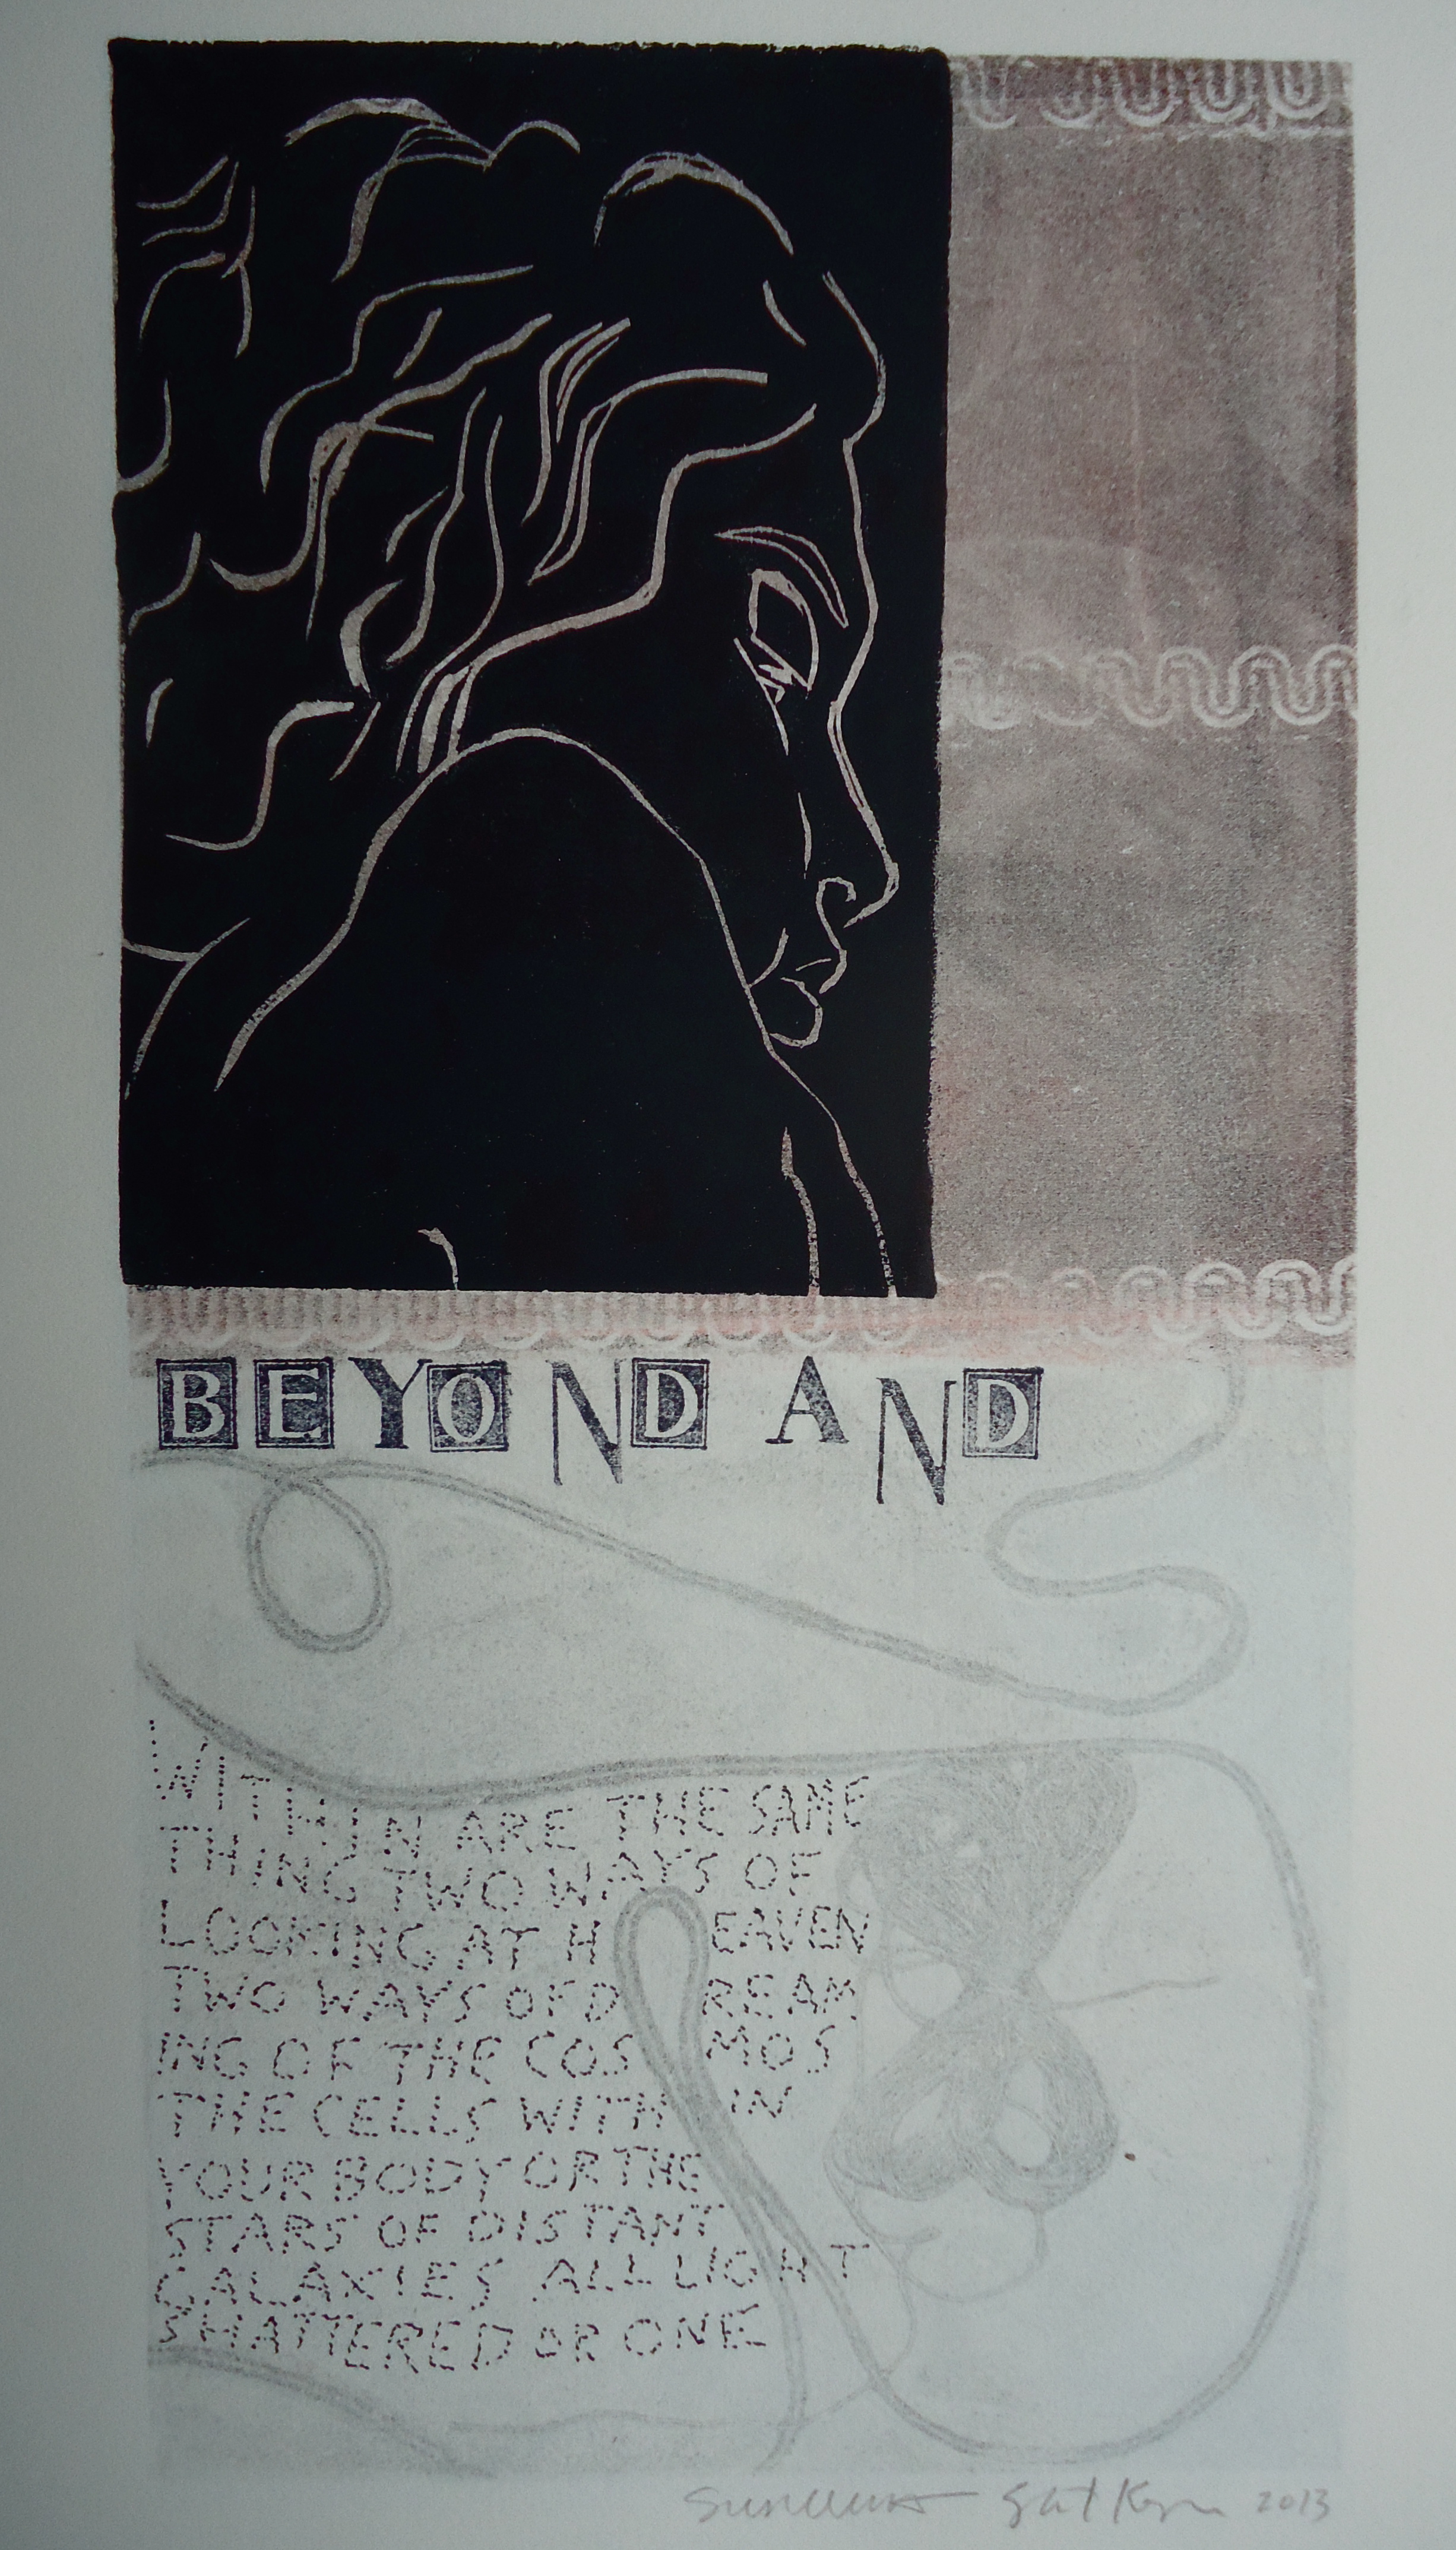   Beyond And   6 x 12 inches  mixed media  image: Susan Webster  hand written and stamped&nbsp;text: Stuart Kestenbaum  2013 